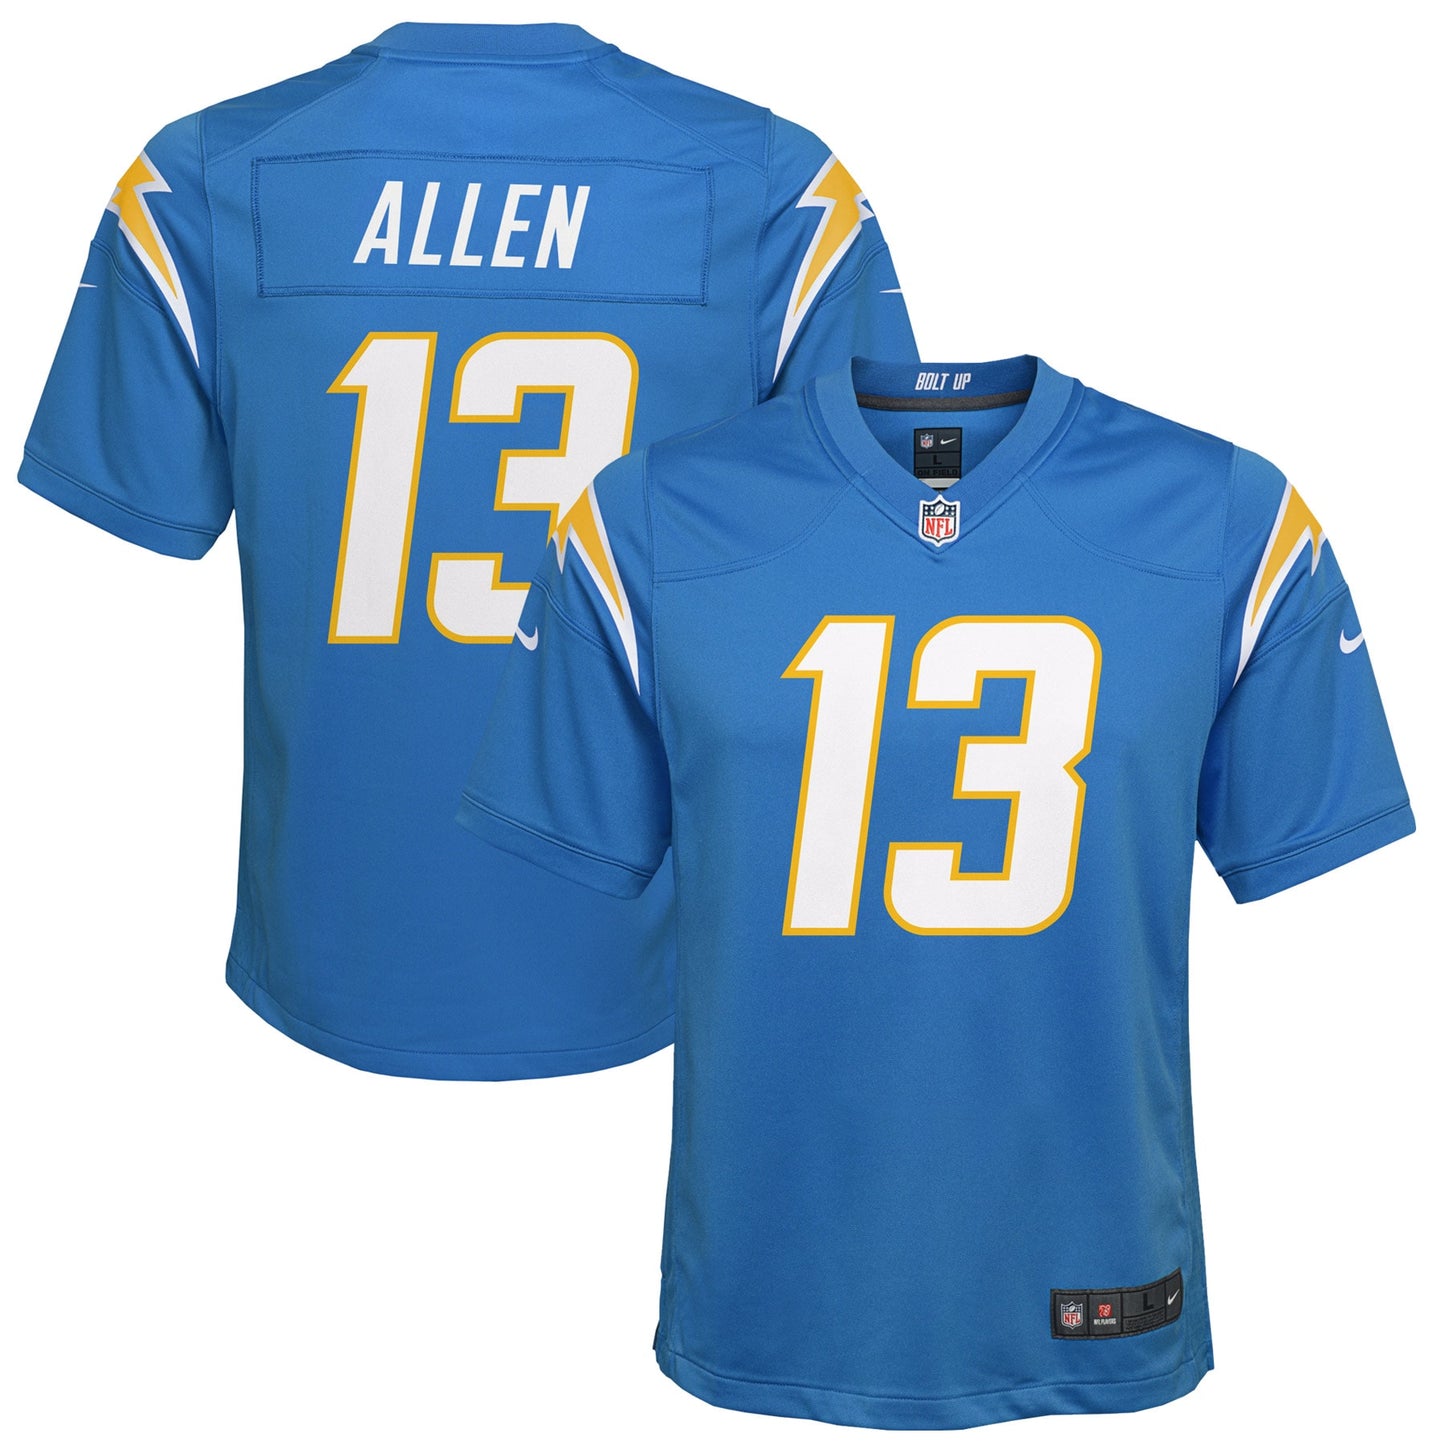 Keenan Allen Los Angeles Chargers Nike Youth Game Jersey - Powder Blue